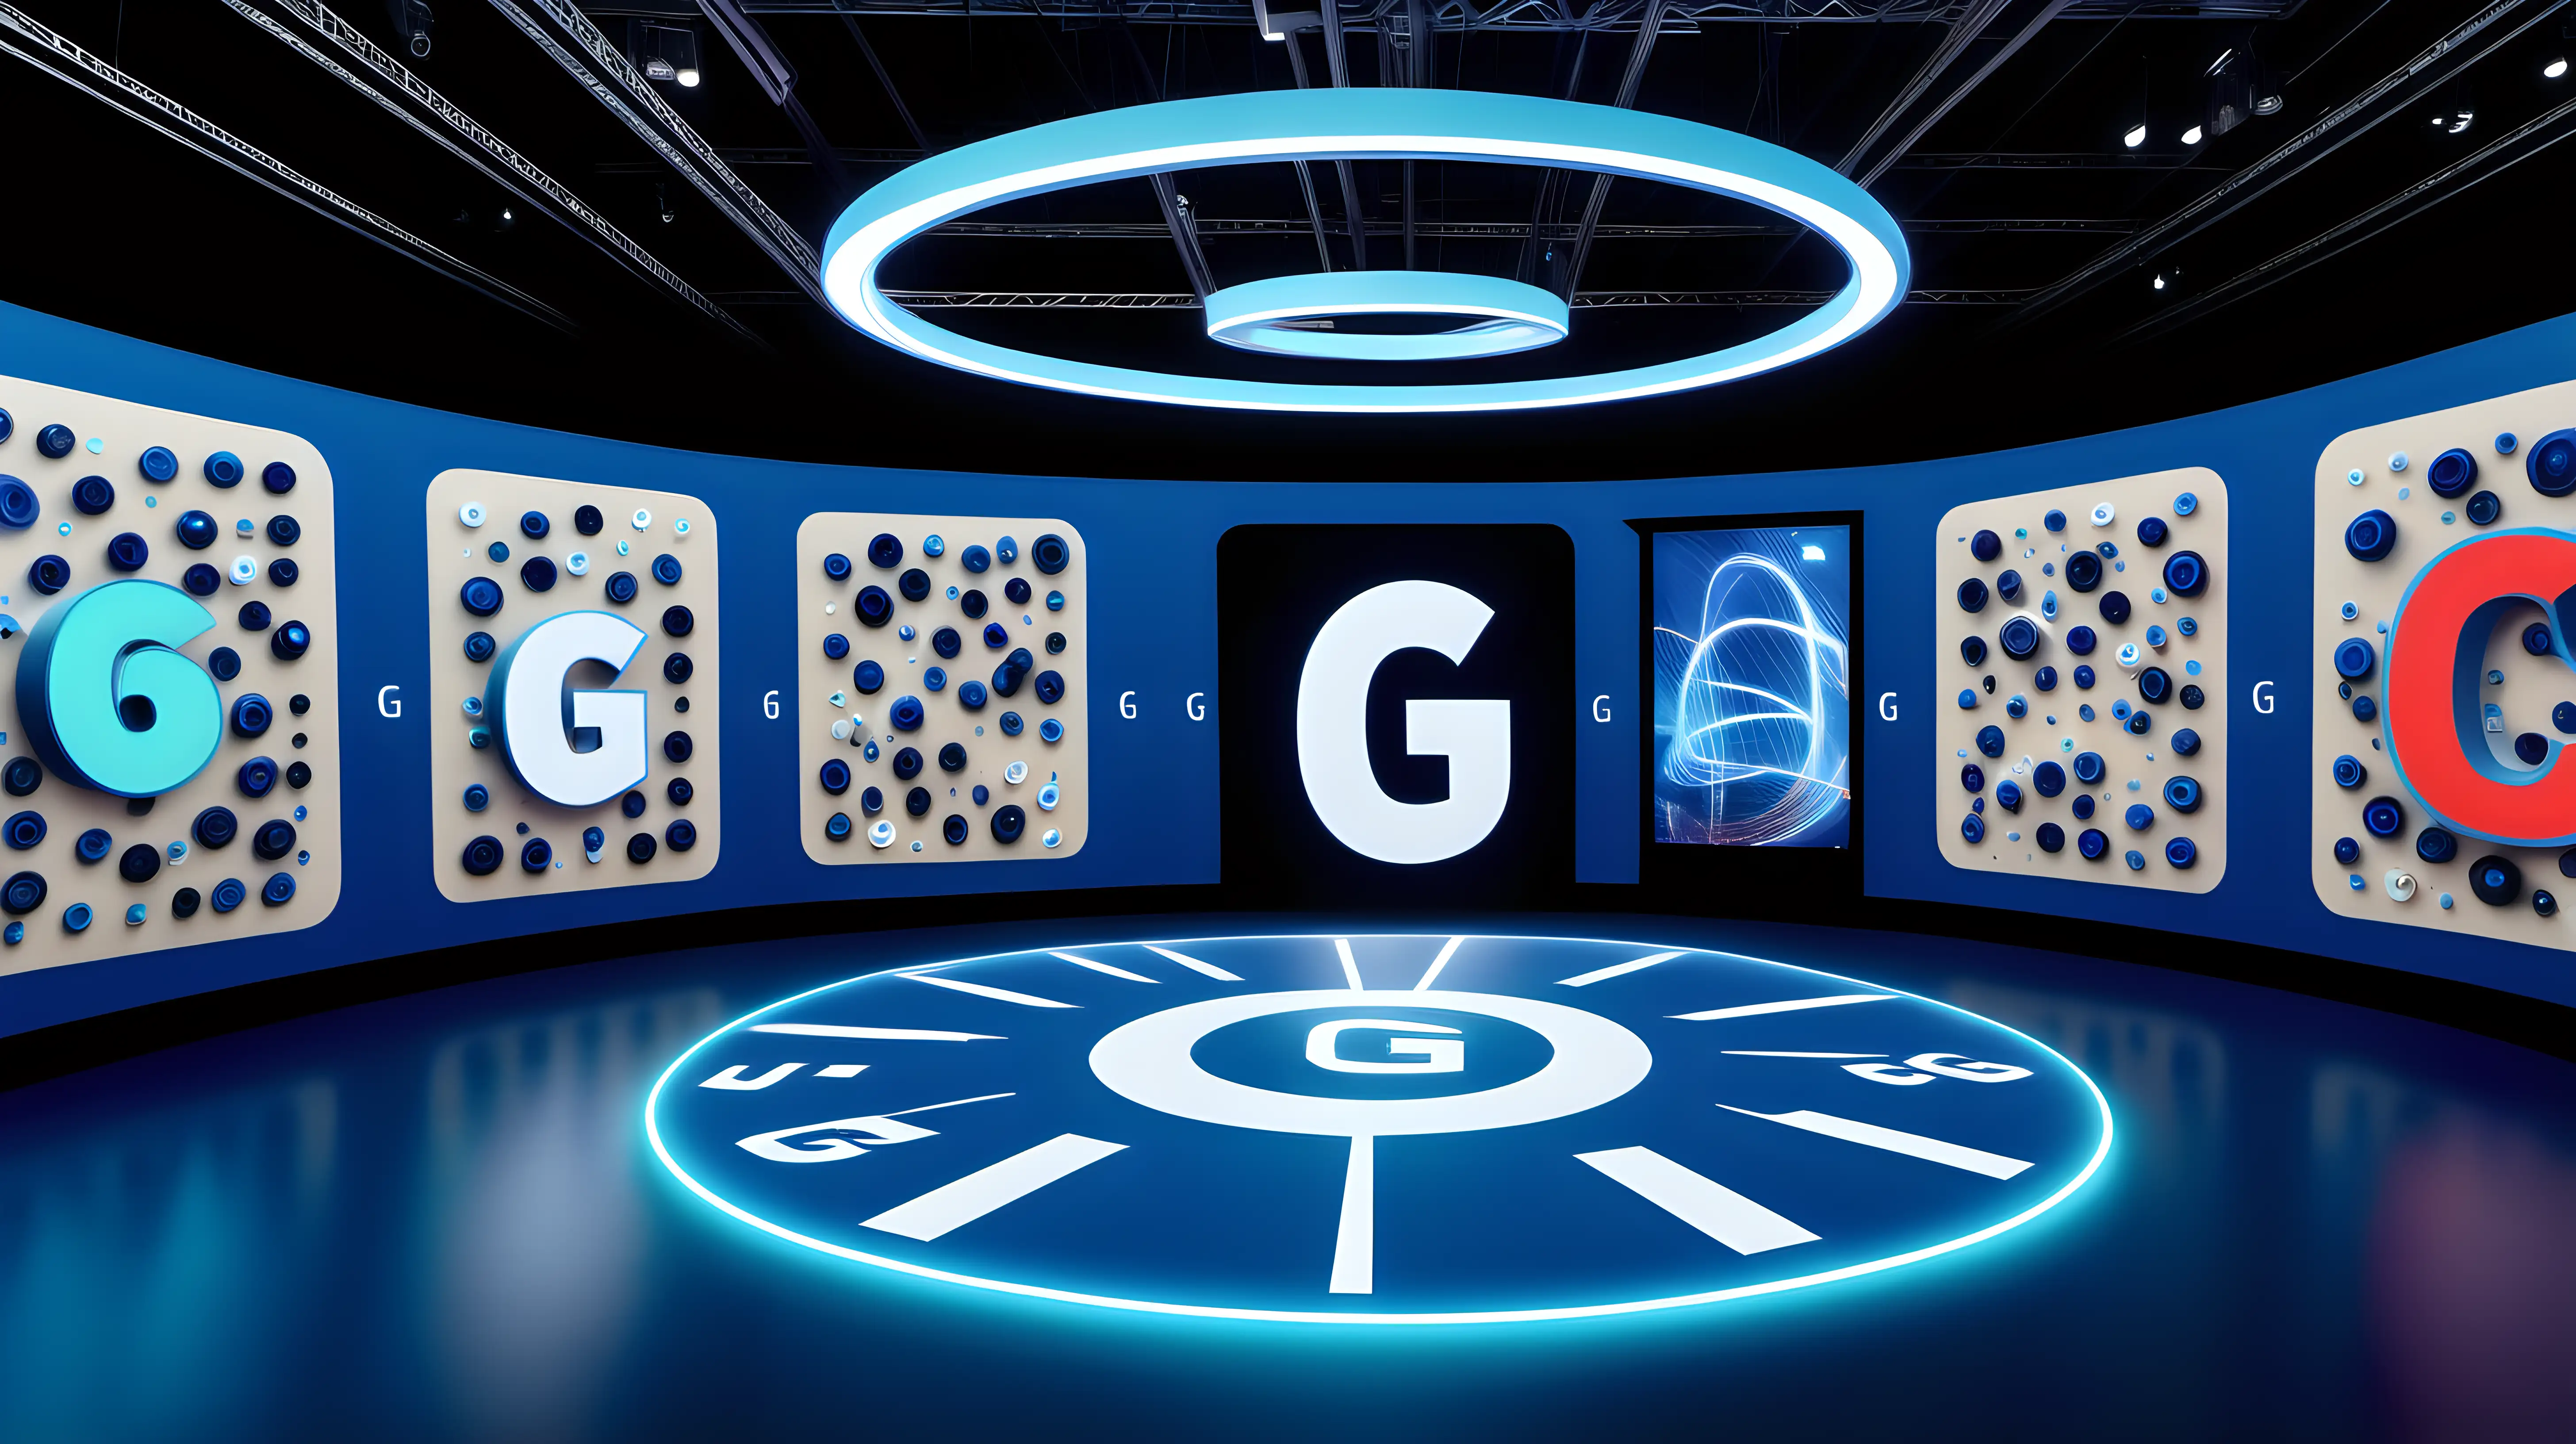 An immersive augmented reality environment where users interact with 6G-enabled devices, and the letters "6G" are prominently displayed in the center.